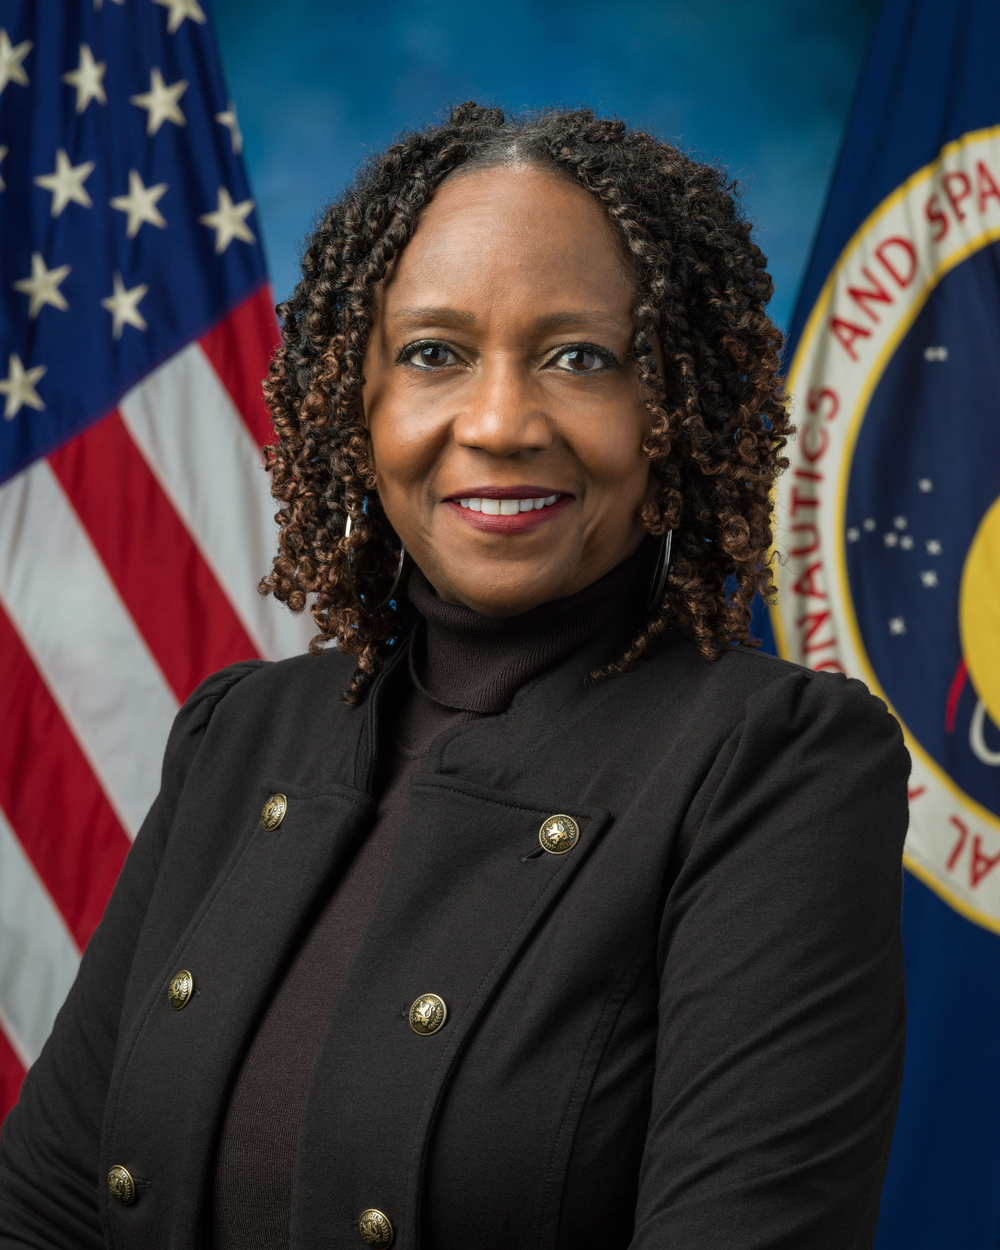 A woman wearing a black blazer smiles in front of a blue background with two flags behind her, a U.S. flag on the left and a NASA flag on the right.